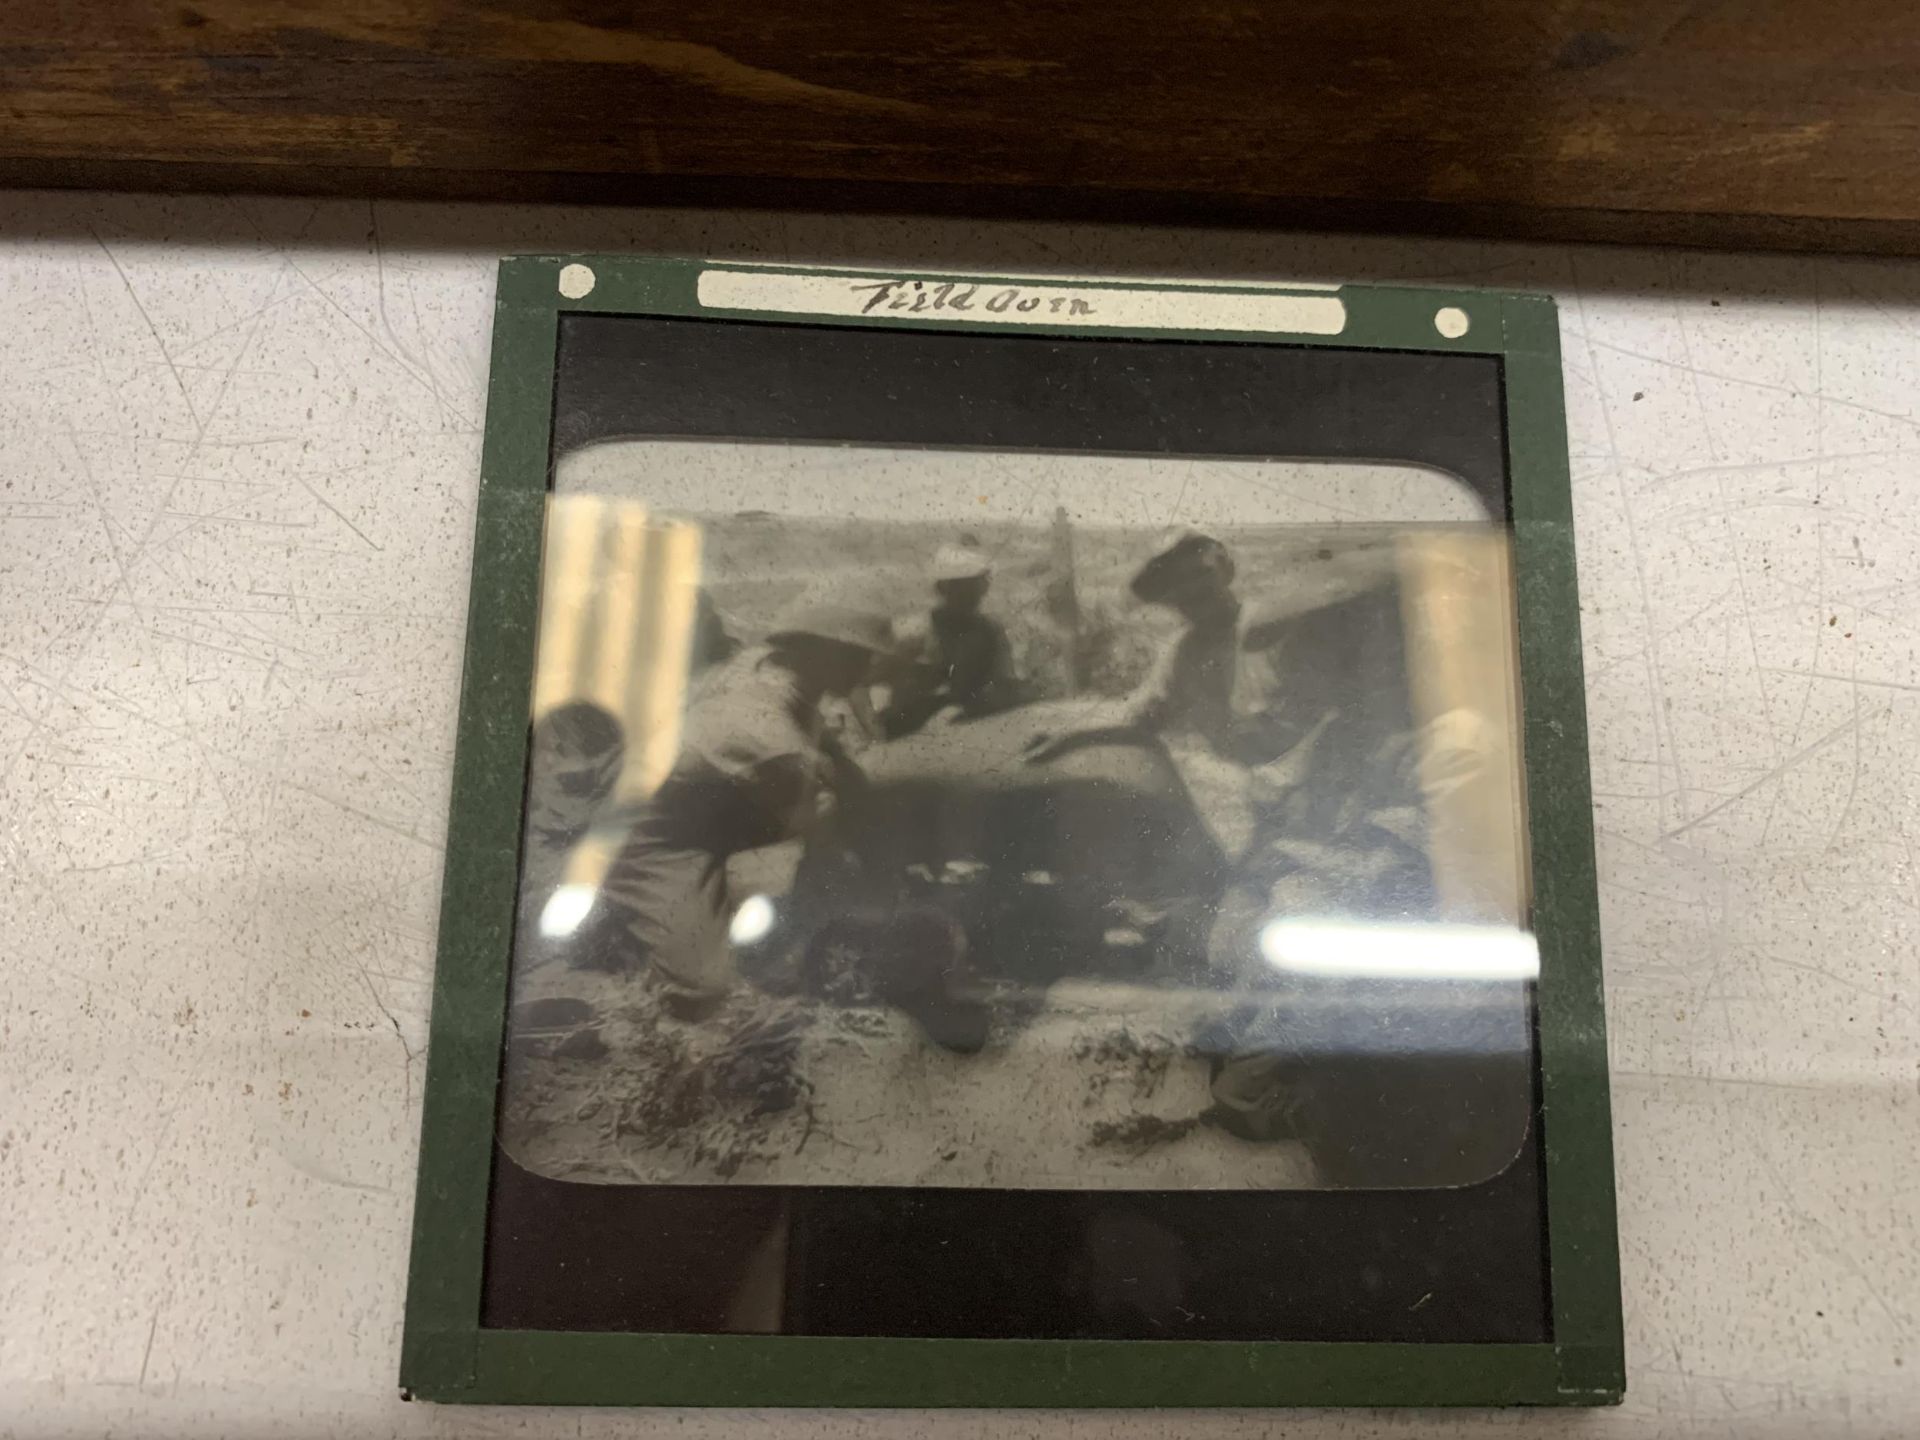 TWO BOXES CONTAINING SIXTY-FOUR BLACK AND WHITE PHOTOGRAPHIC SLIDES RELATING TO THE BOER WAR - Image 4 of 5